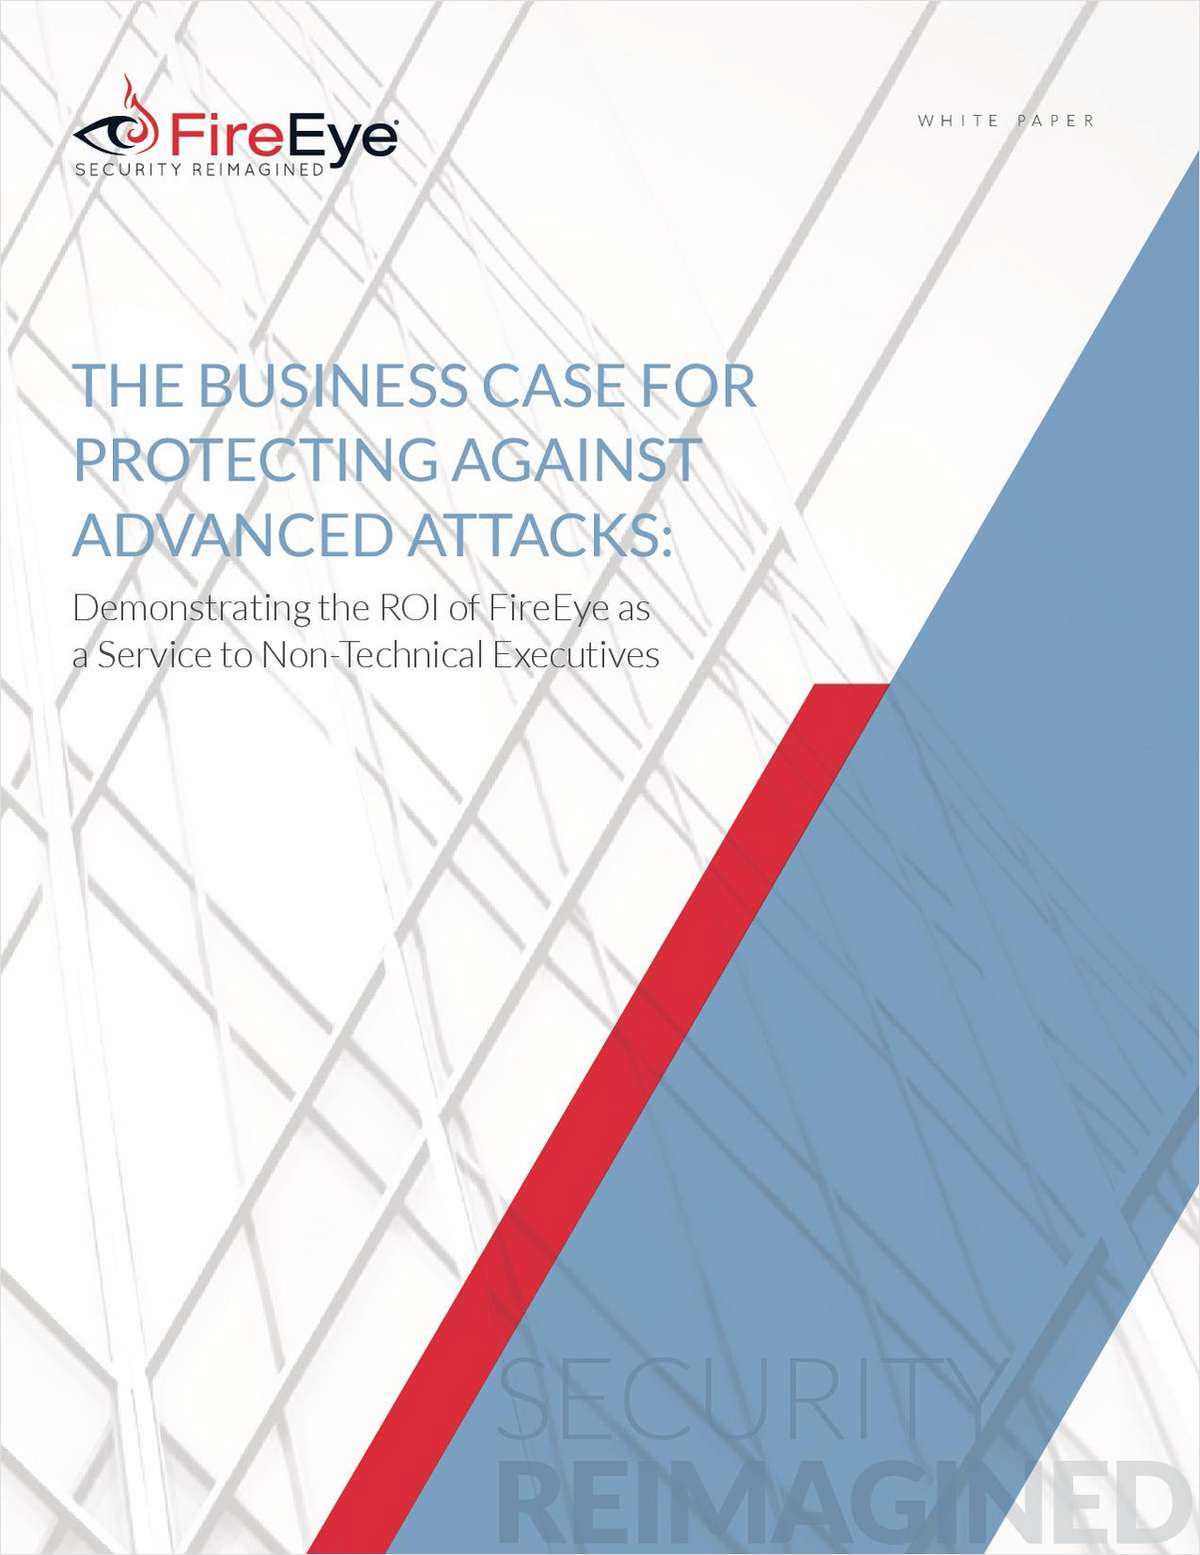 The Business Case for Protecting Against Advance Attacks: Demonstrating the ROI of FireEye as a Service to Non-Technical Executives